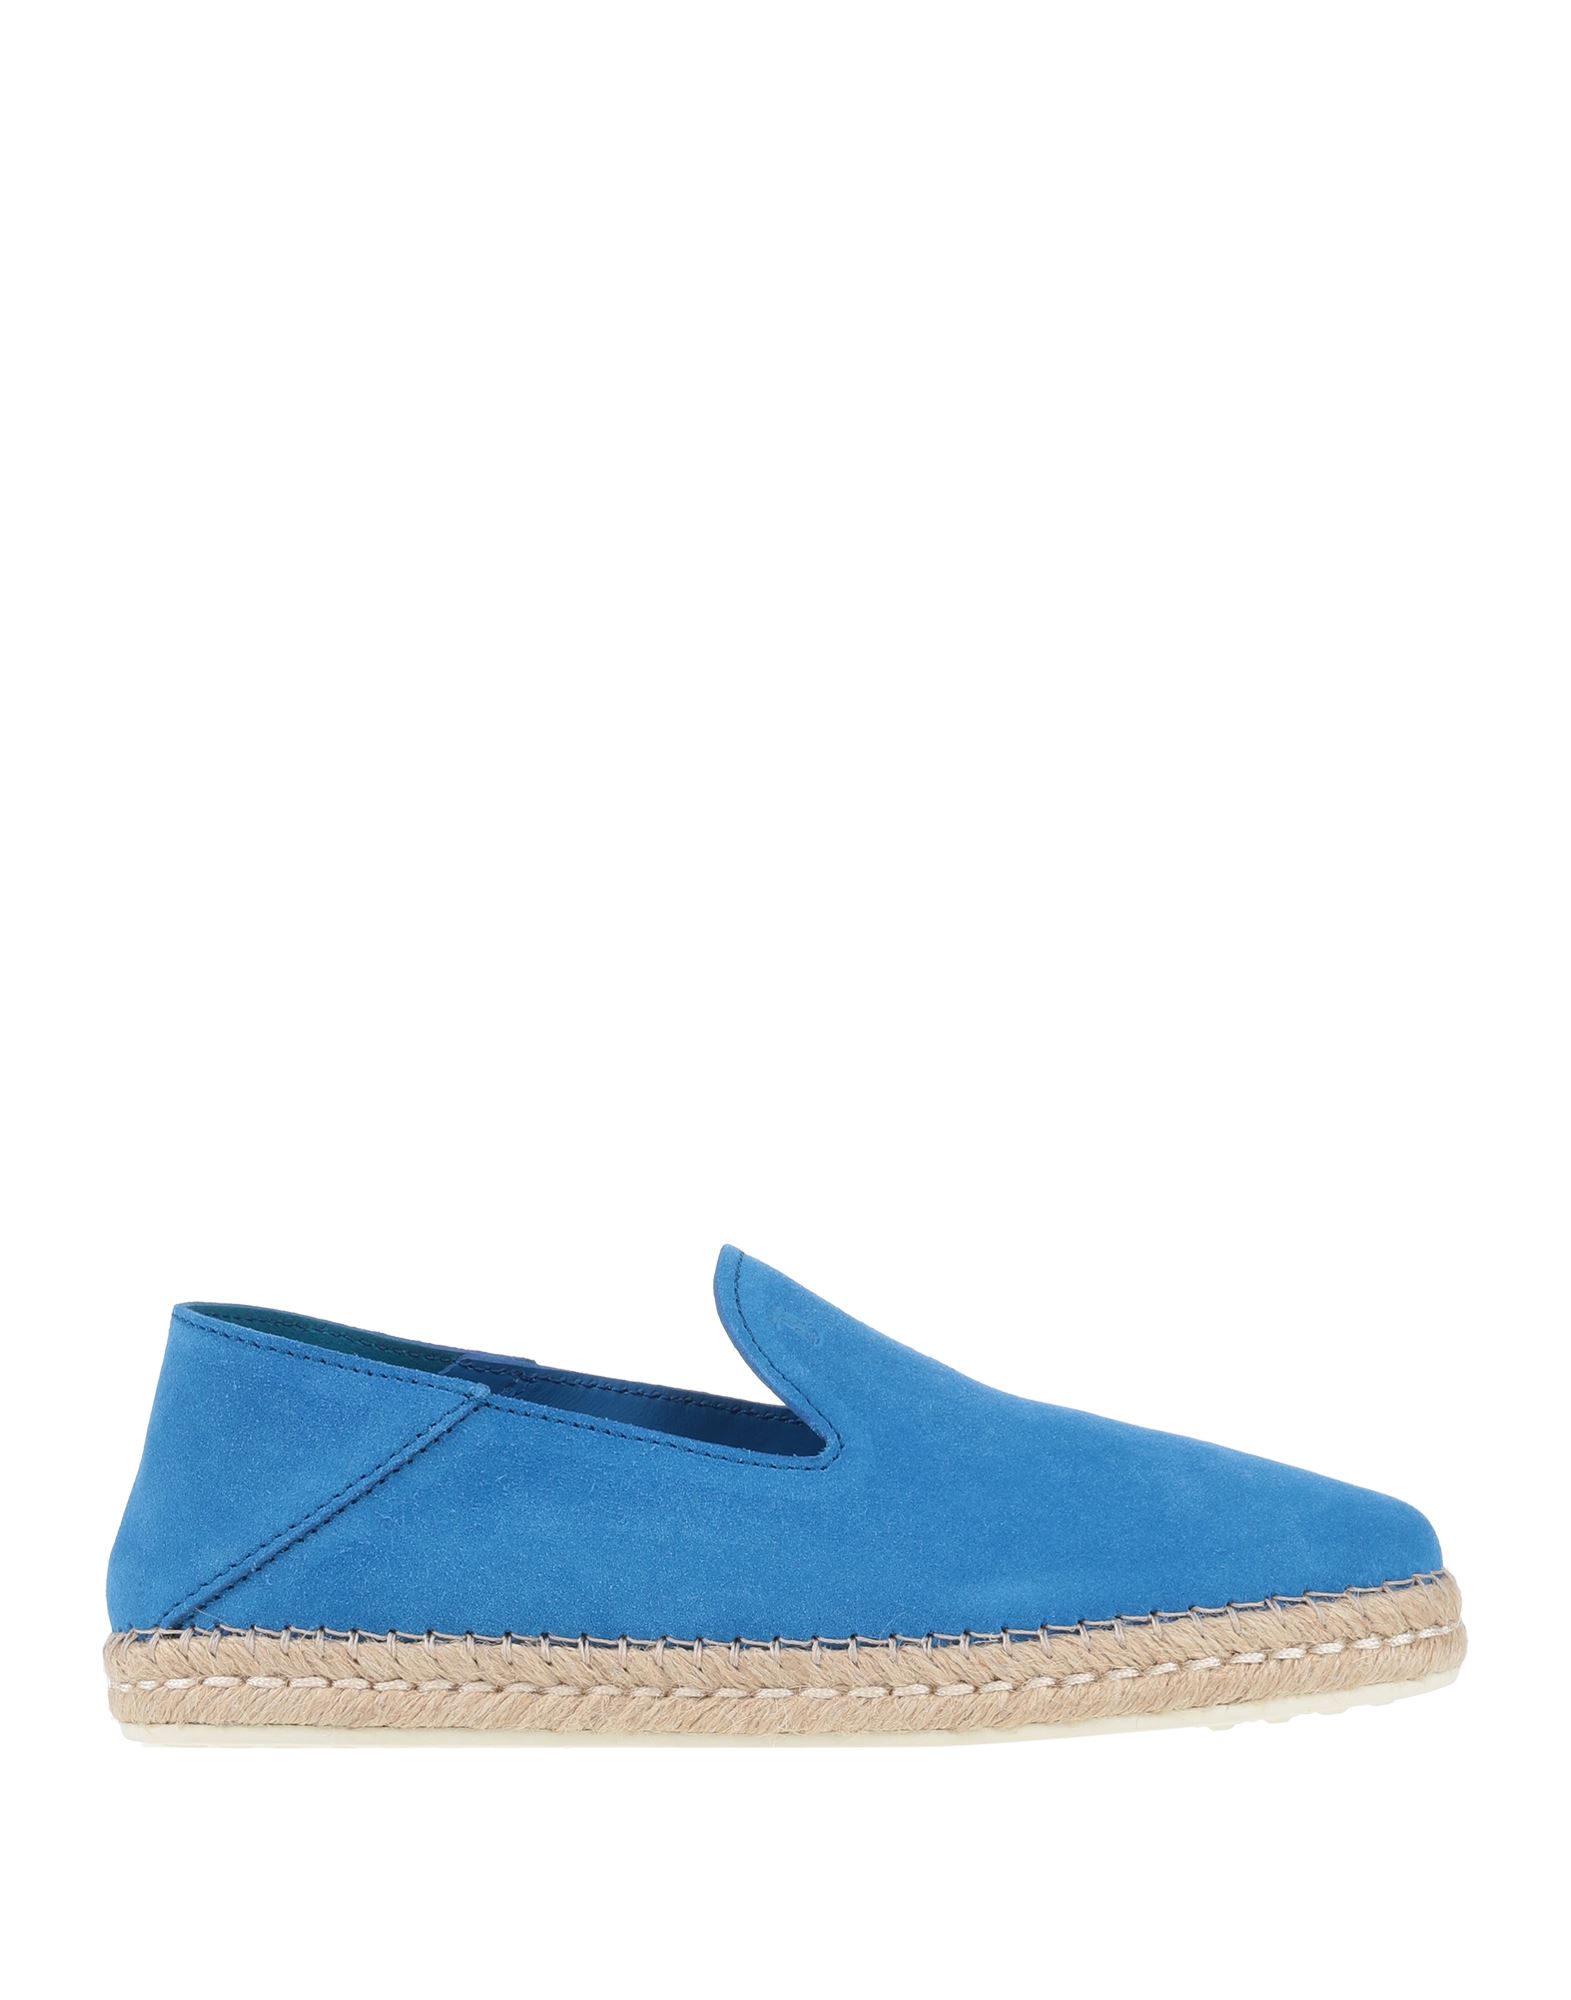 TOD'S TOD'S MAN ESPADRILLES AZURE SIZE 10 SOFT LEATHER